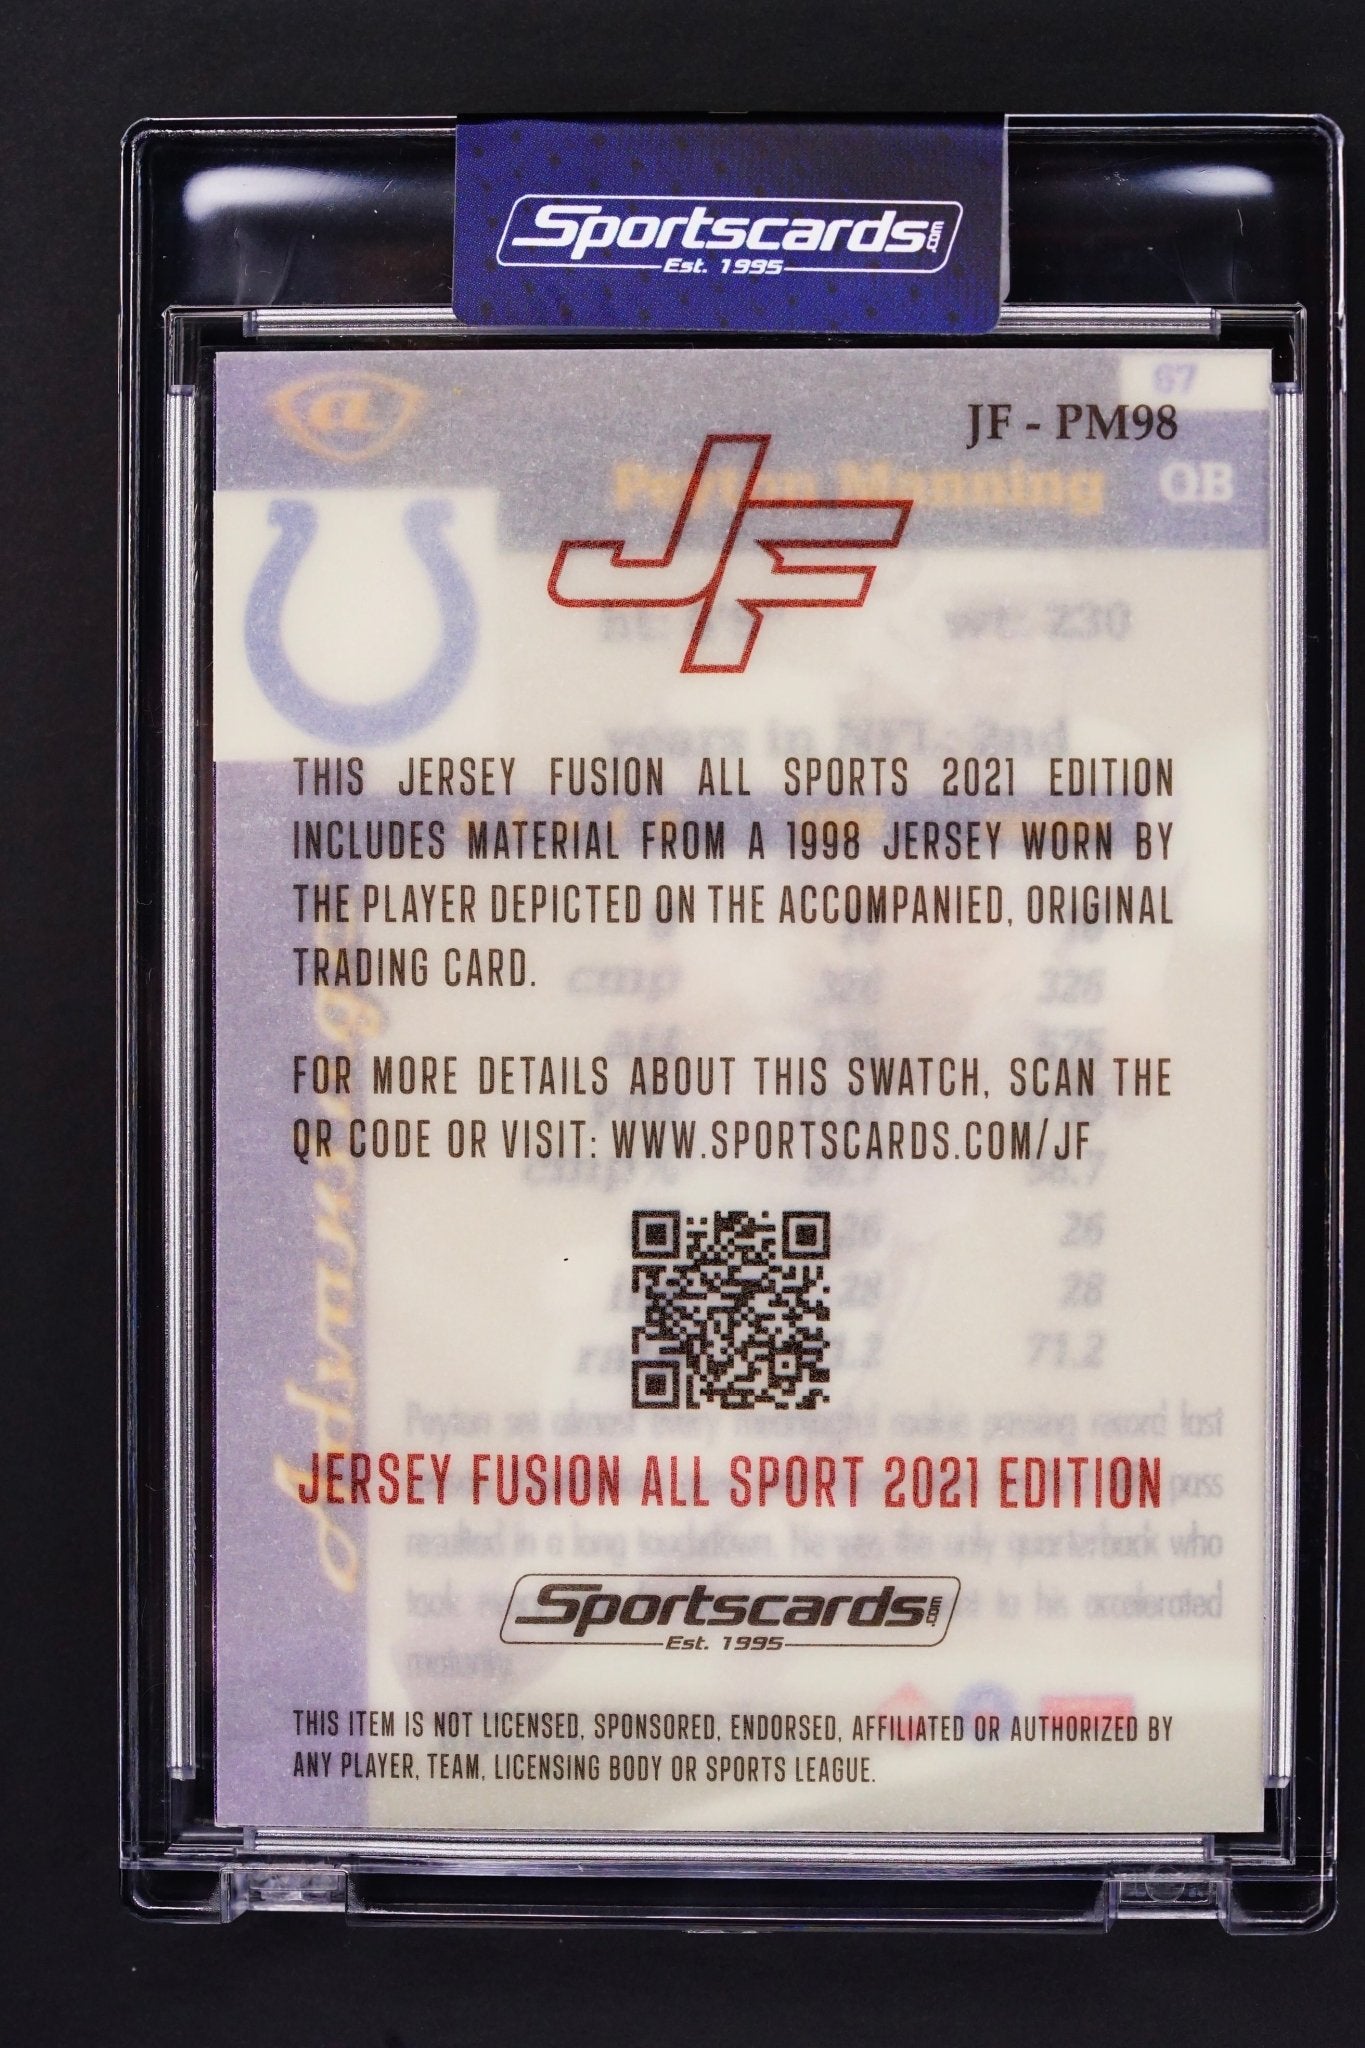 NFL Card: Payton Manning Game used swatch Jersey fusion - THE CARD SPOT PTY LTD.Sports CardJersey Fusion